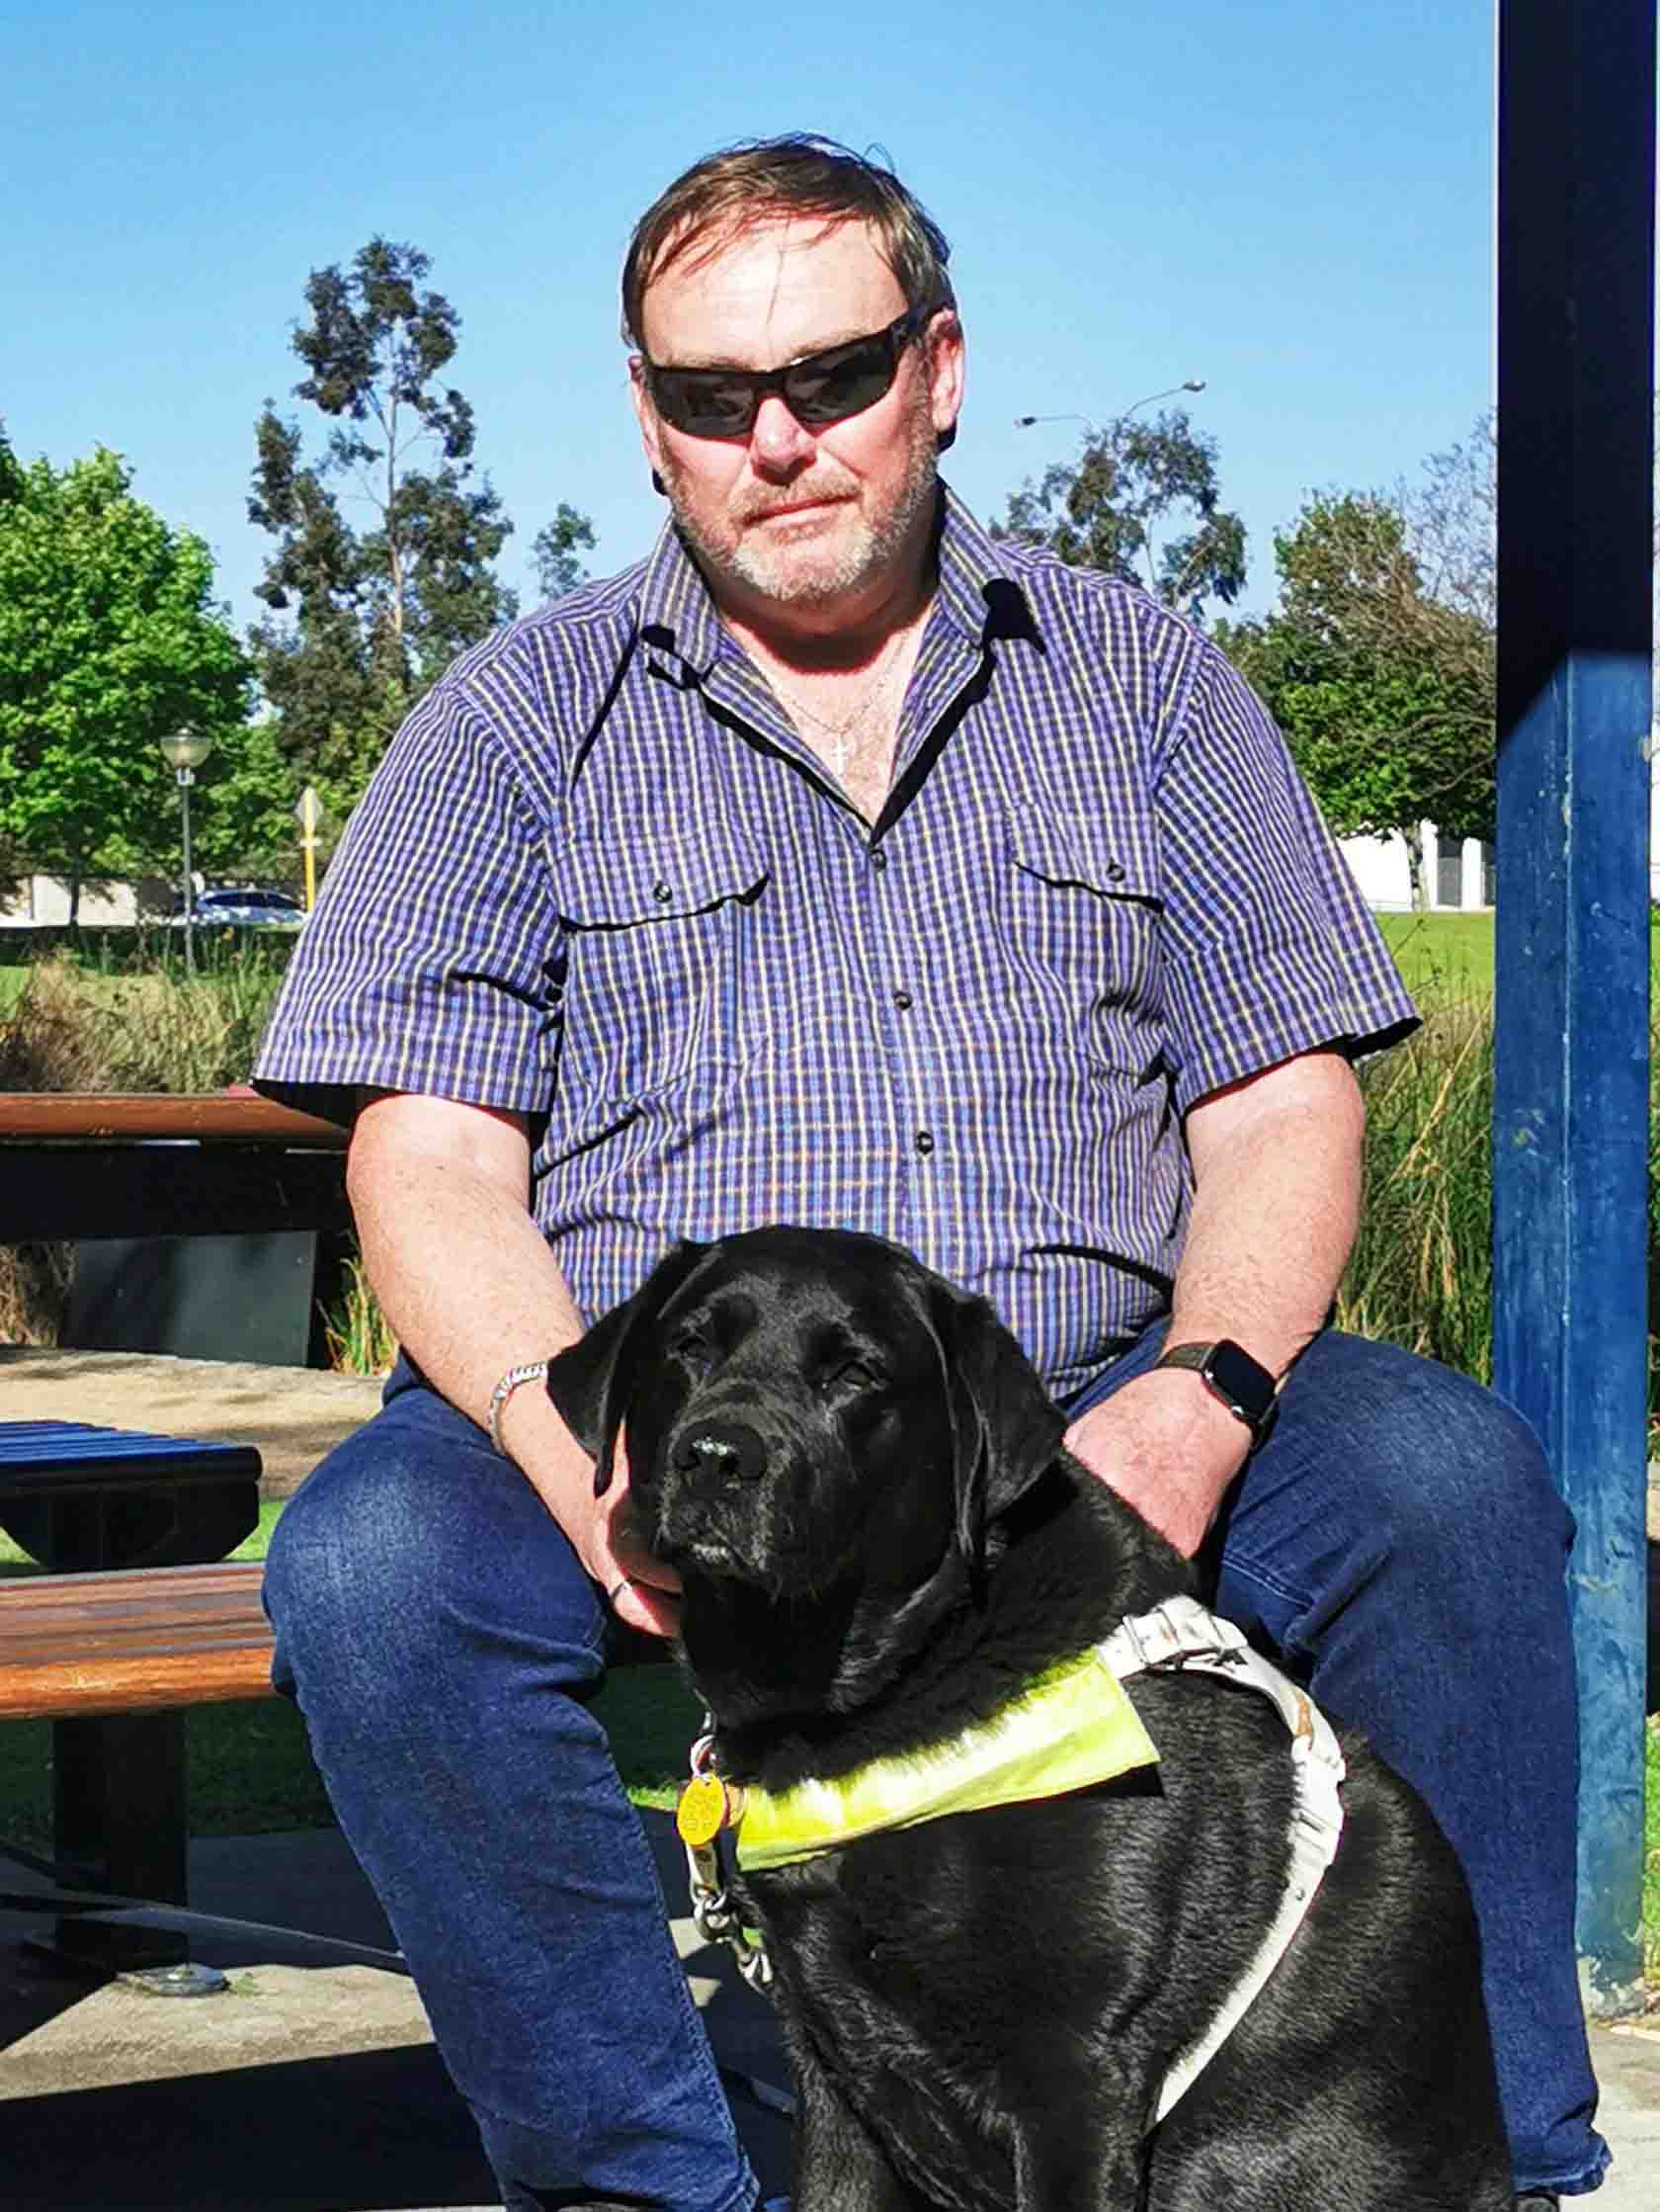 A man wearing sunglasses is seated outside with his guide dog